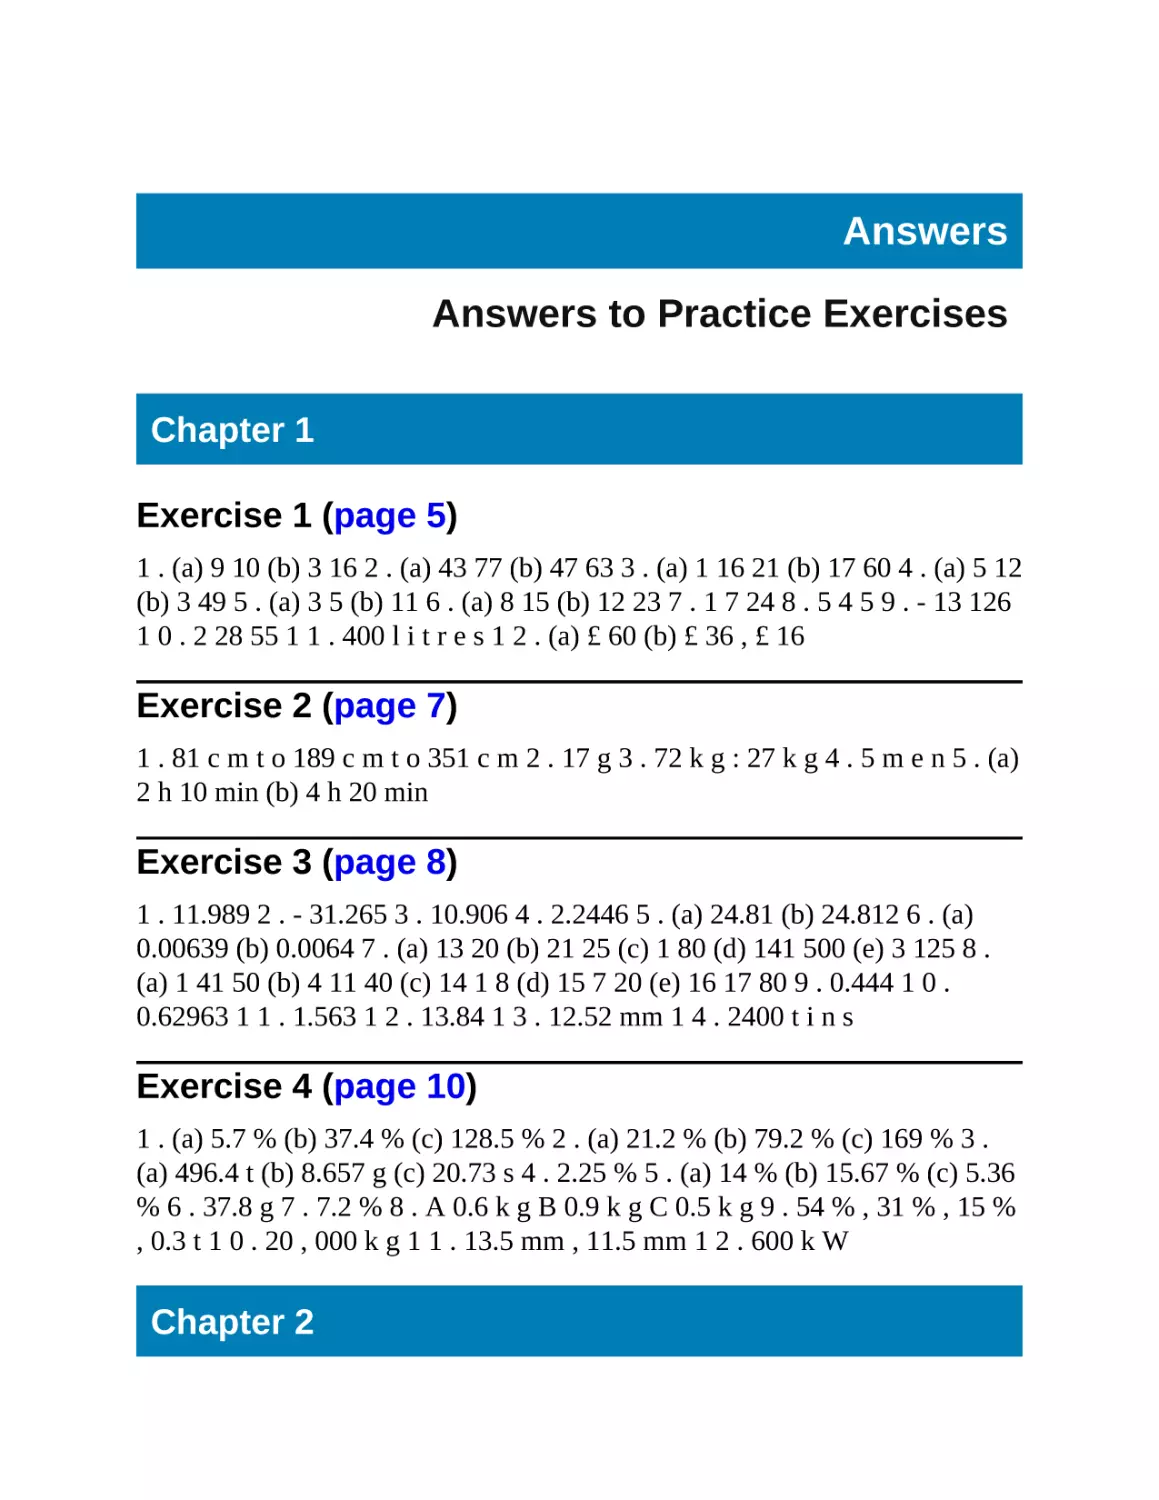 Answers to Practice Exercises